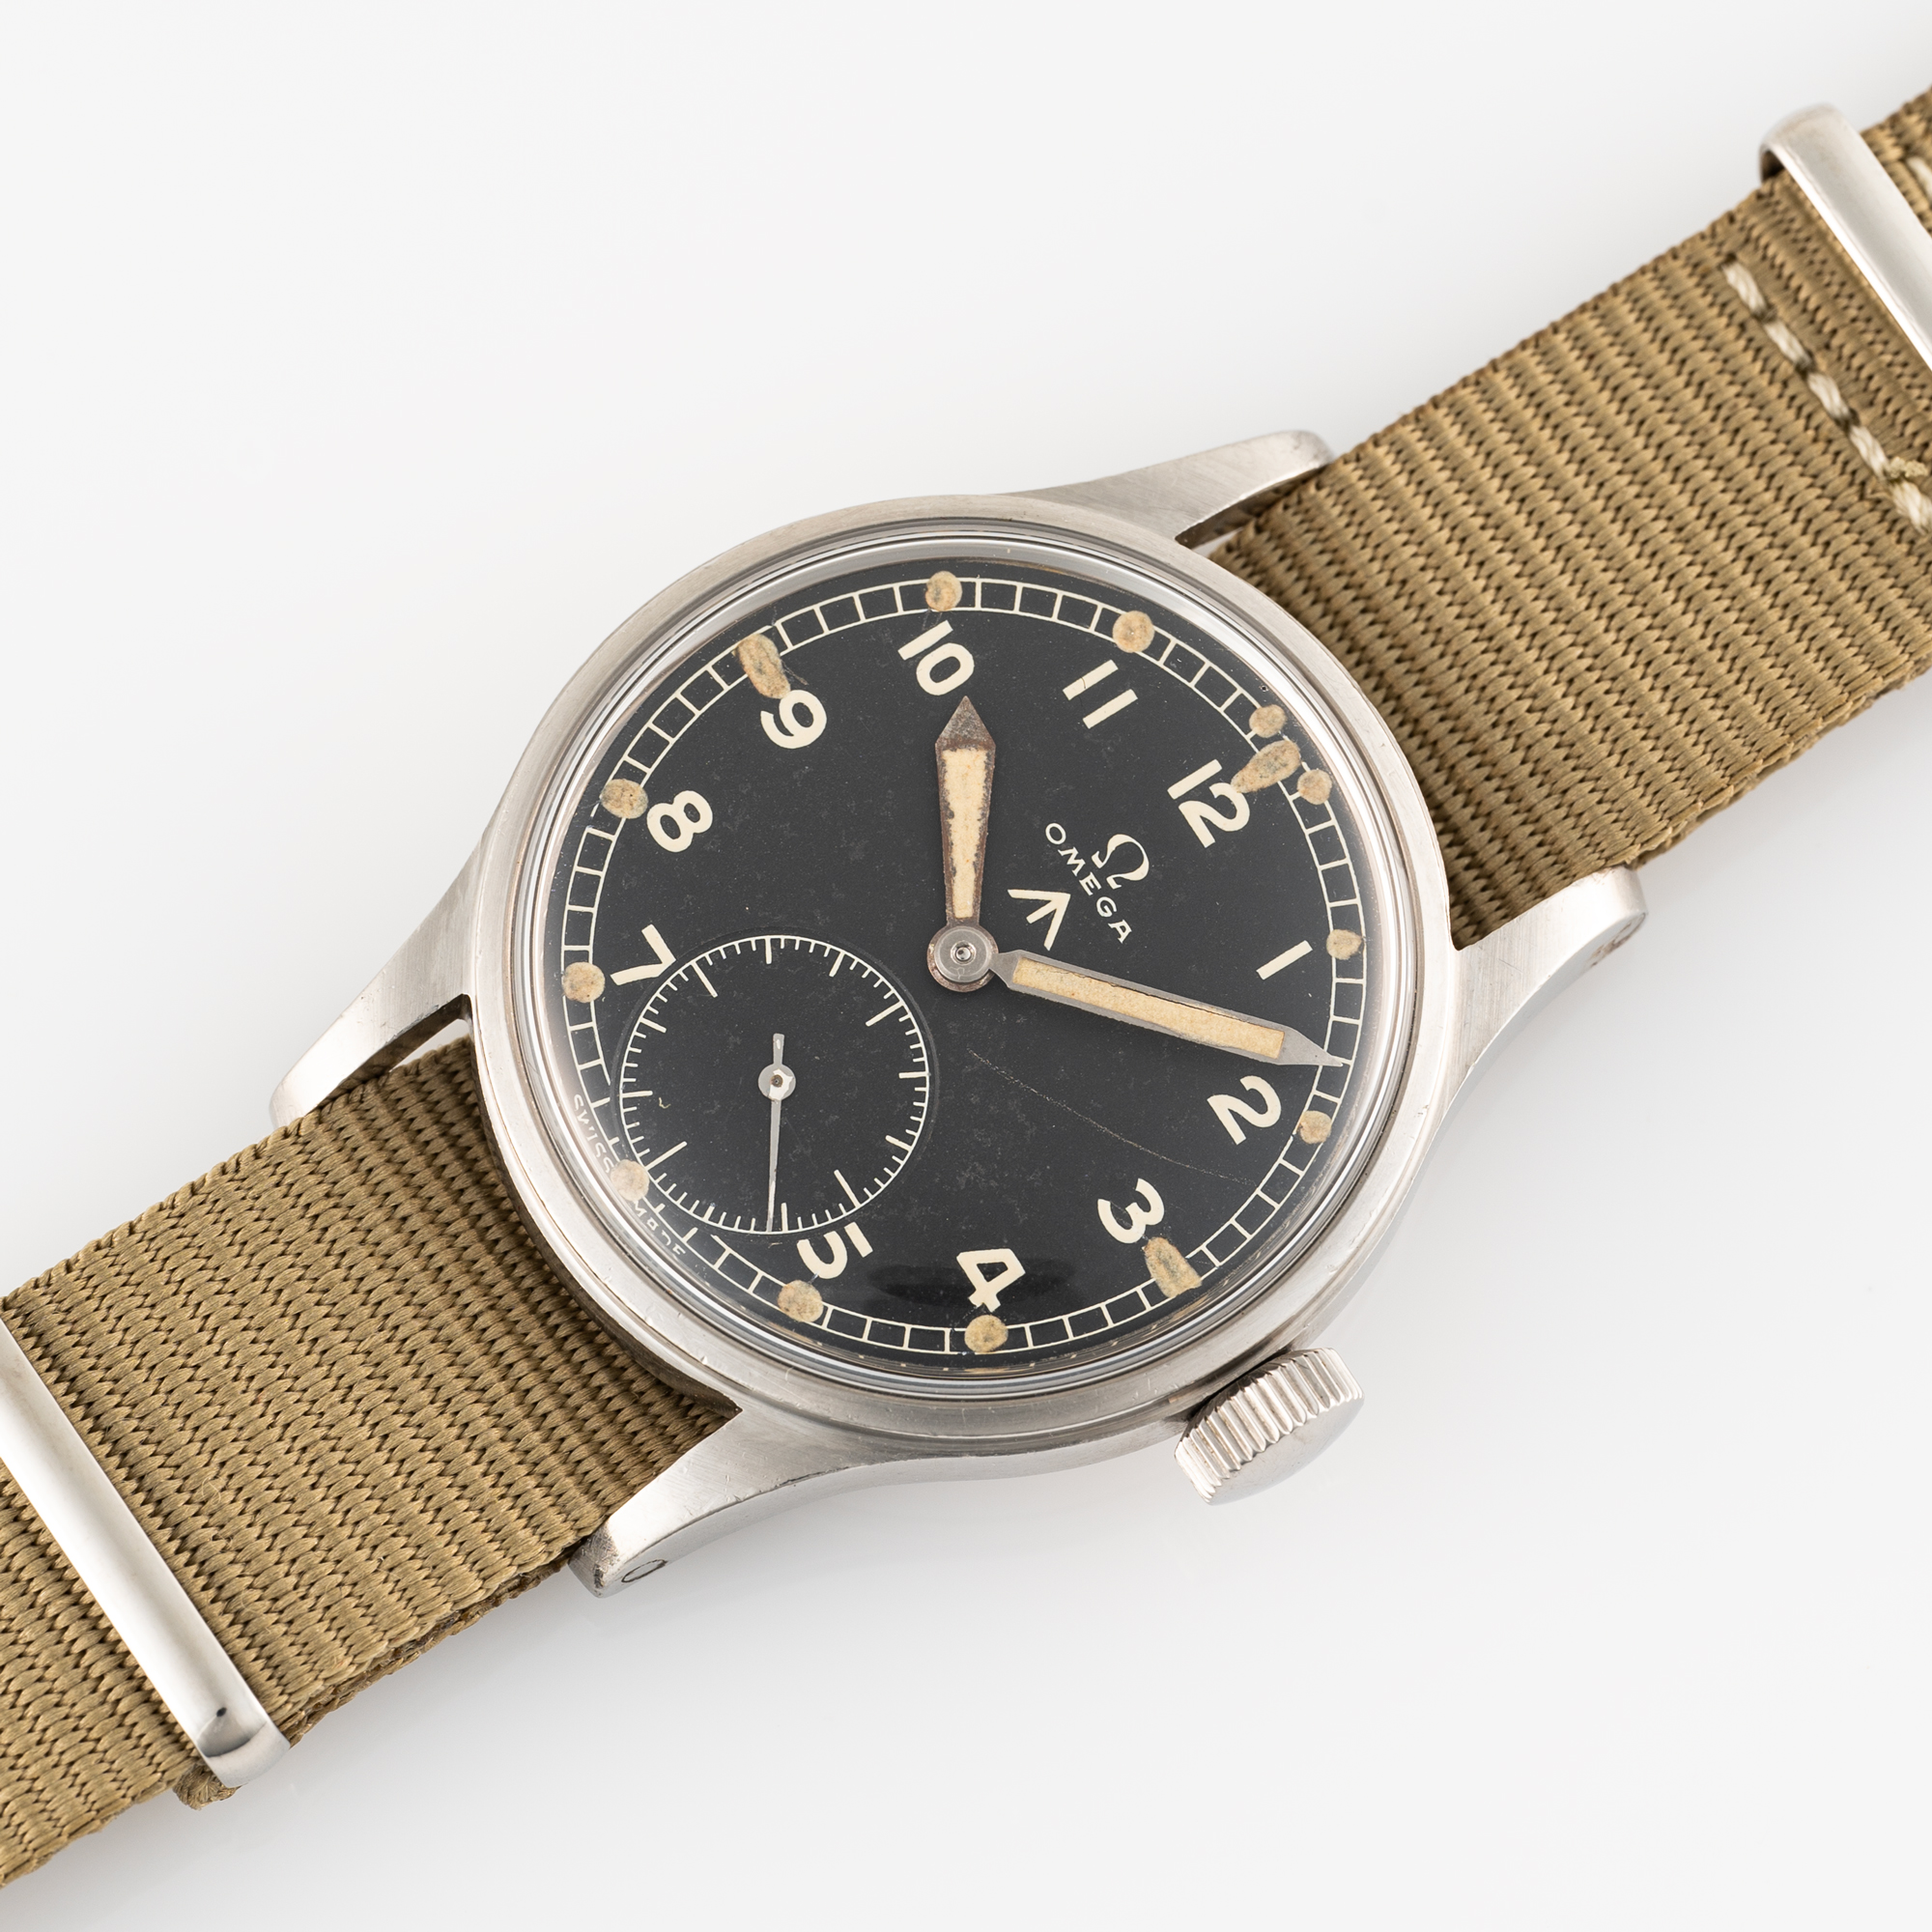 A GENTLEMAN'S STAINLESS STEEL BRITISH MILITARY OMEGA W.W.W. WRIST WATCH CIRCA 1945, PART OF THE " - Image 4 of 8